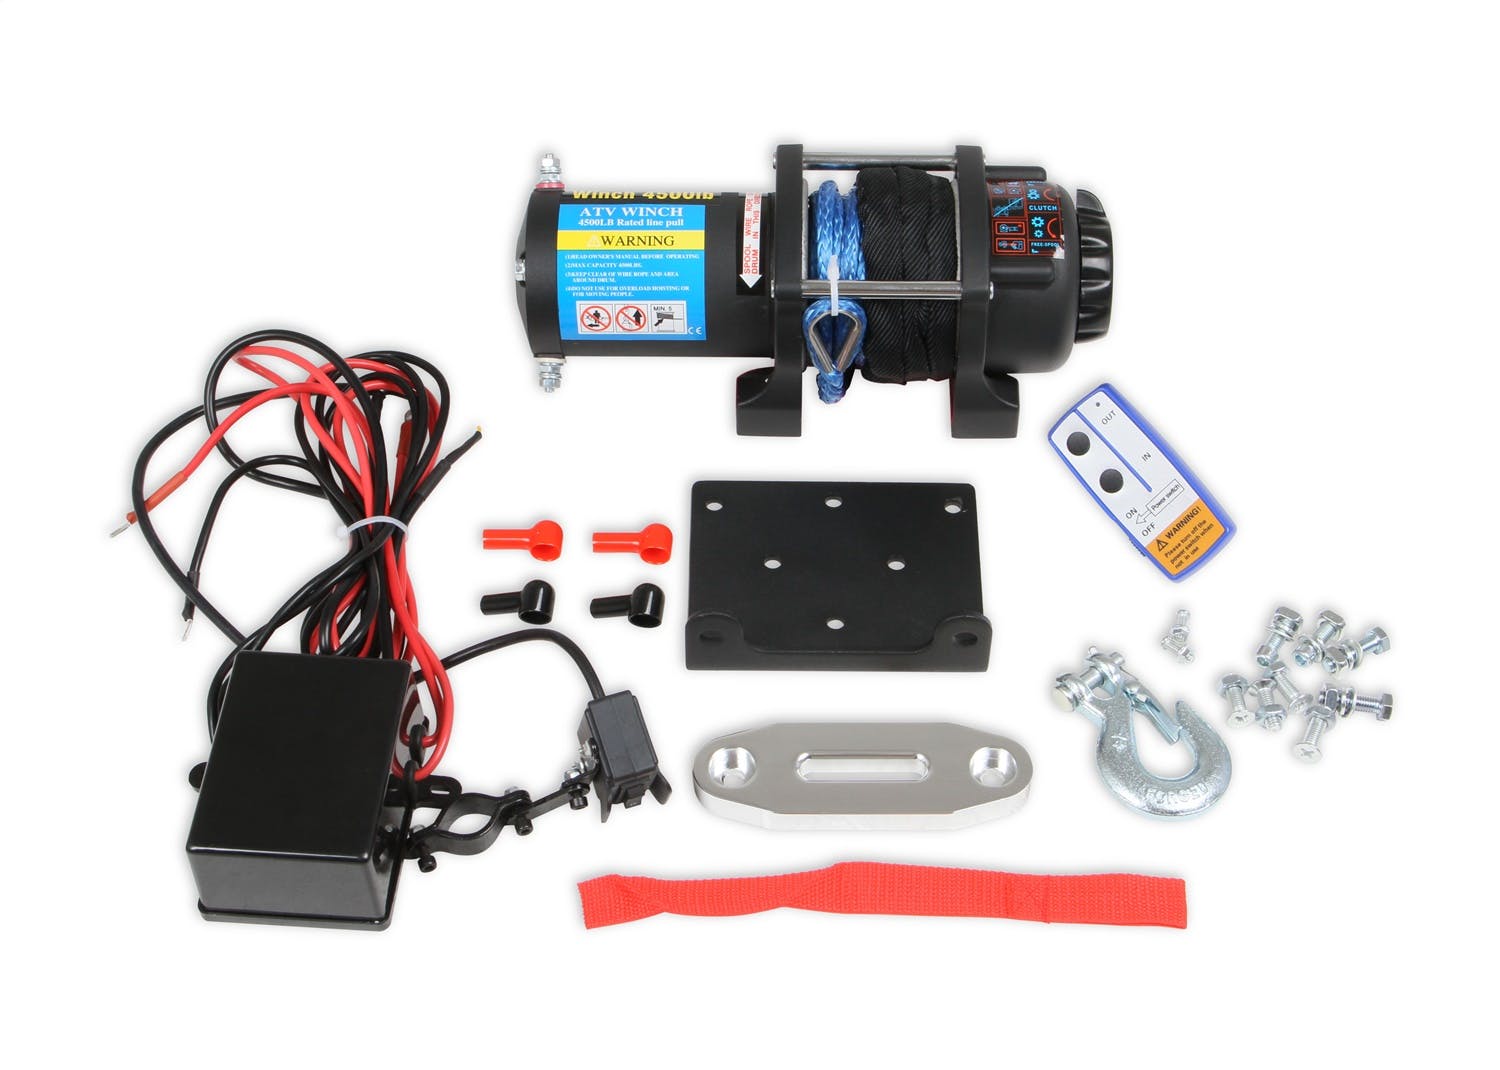 Anvil Off-Road 4511AOR 12V WINCH 4500 LBS - ROPE